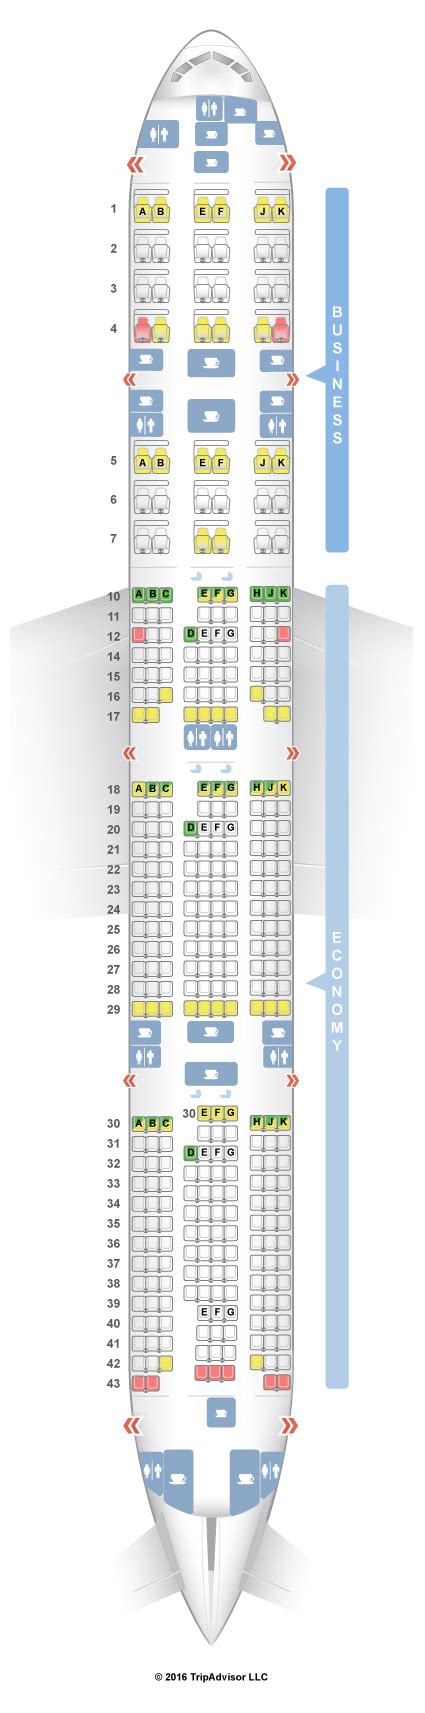 Seat map for qatar airways. Yes. Detailed seat map Qatar Airways Airbus A380 800. Find the best airplanes seats, information on legroom, recline and in-flight entertainment using our detailed online seating charts. 